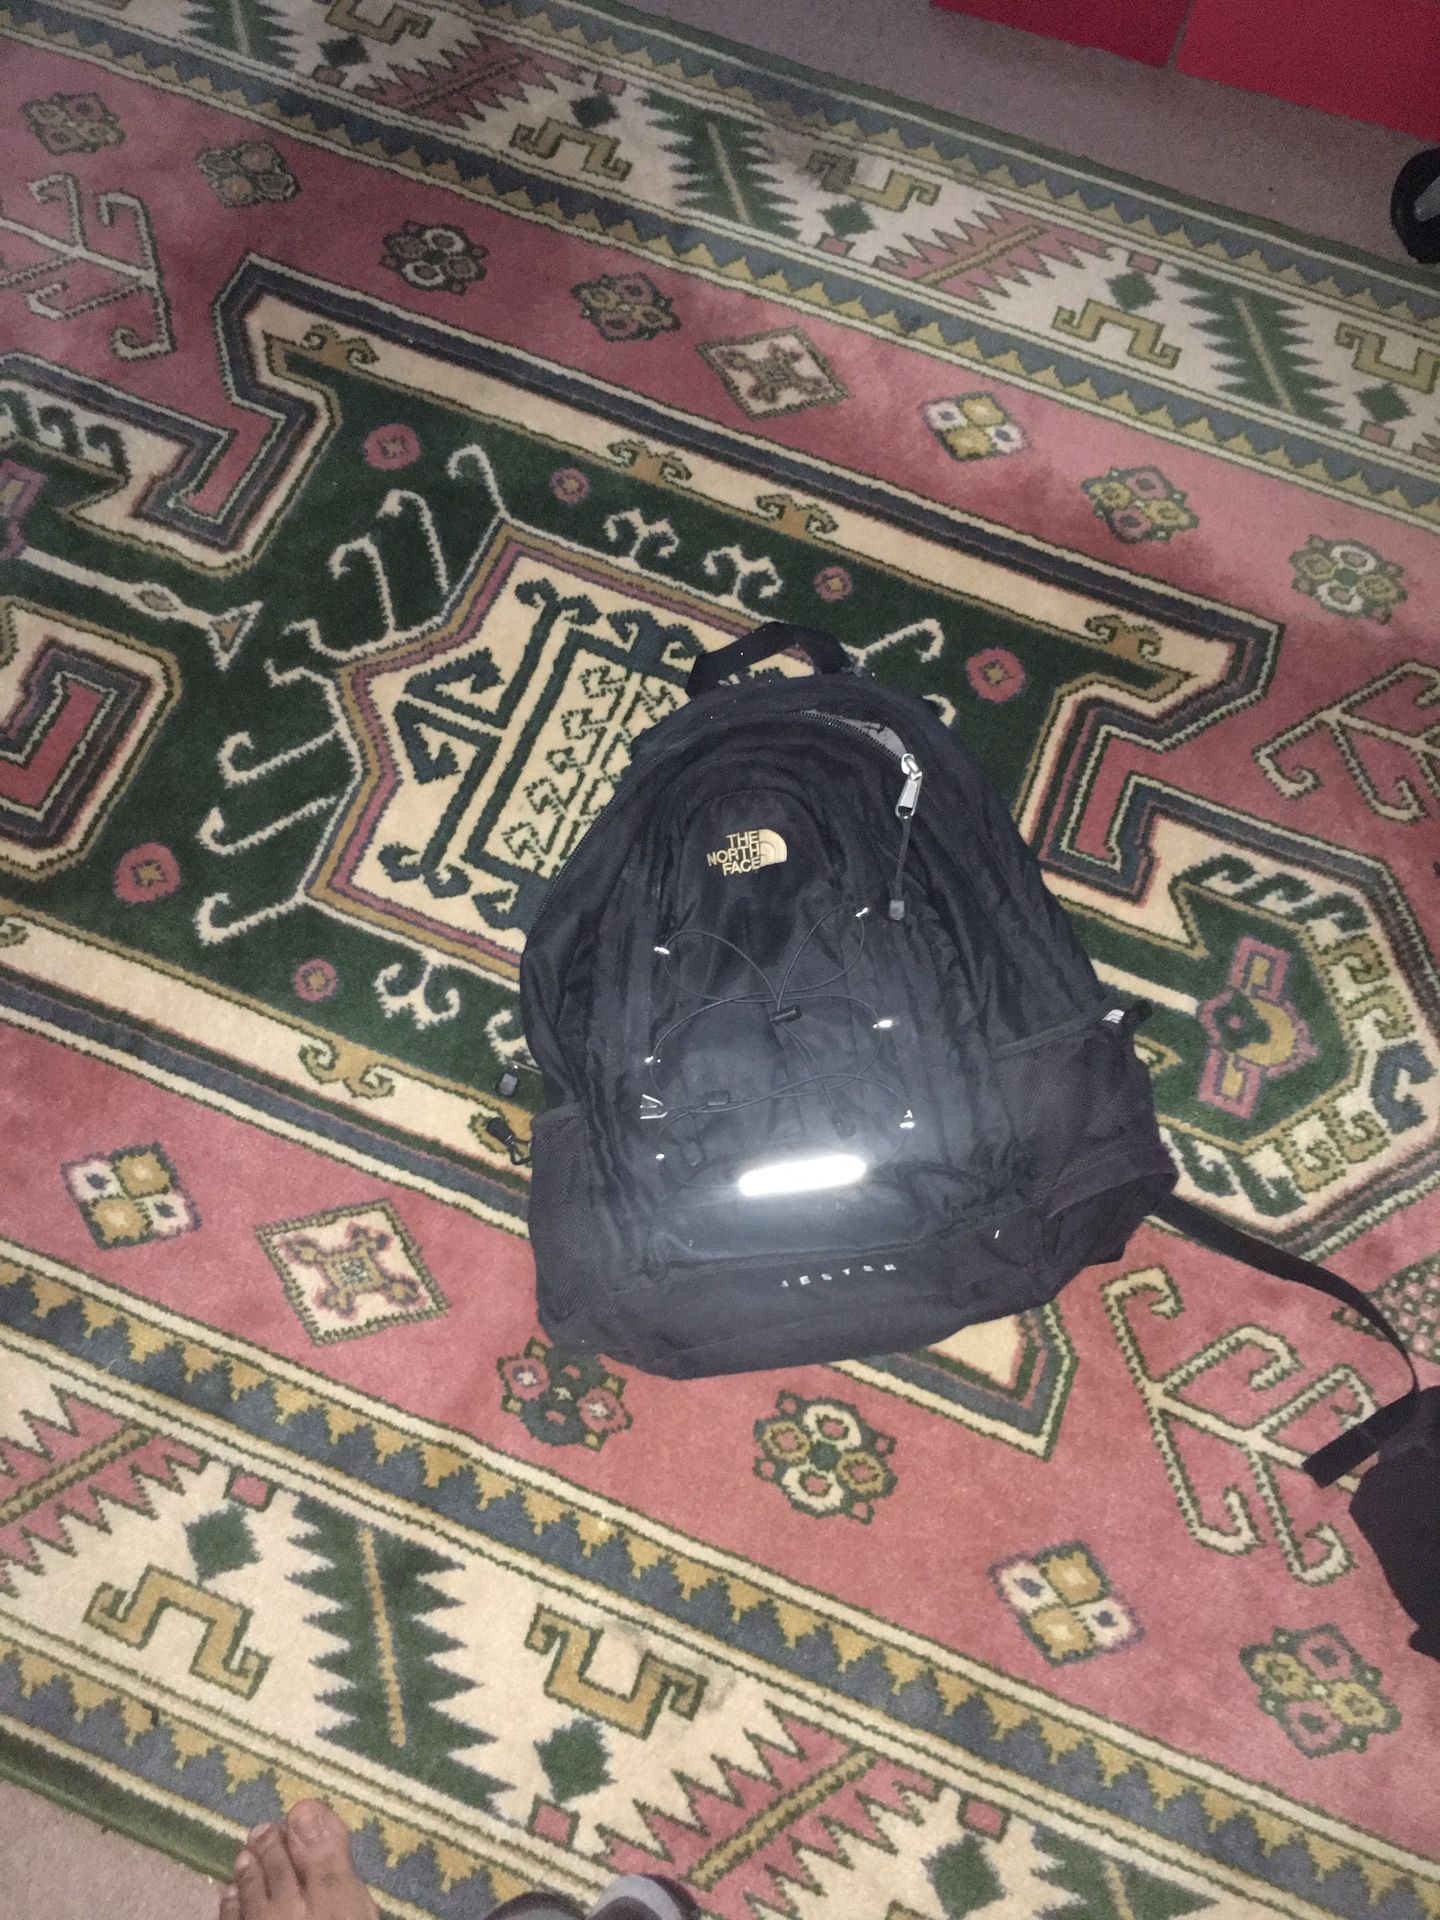 North face backpack